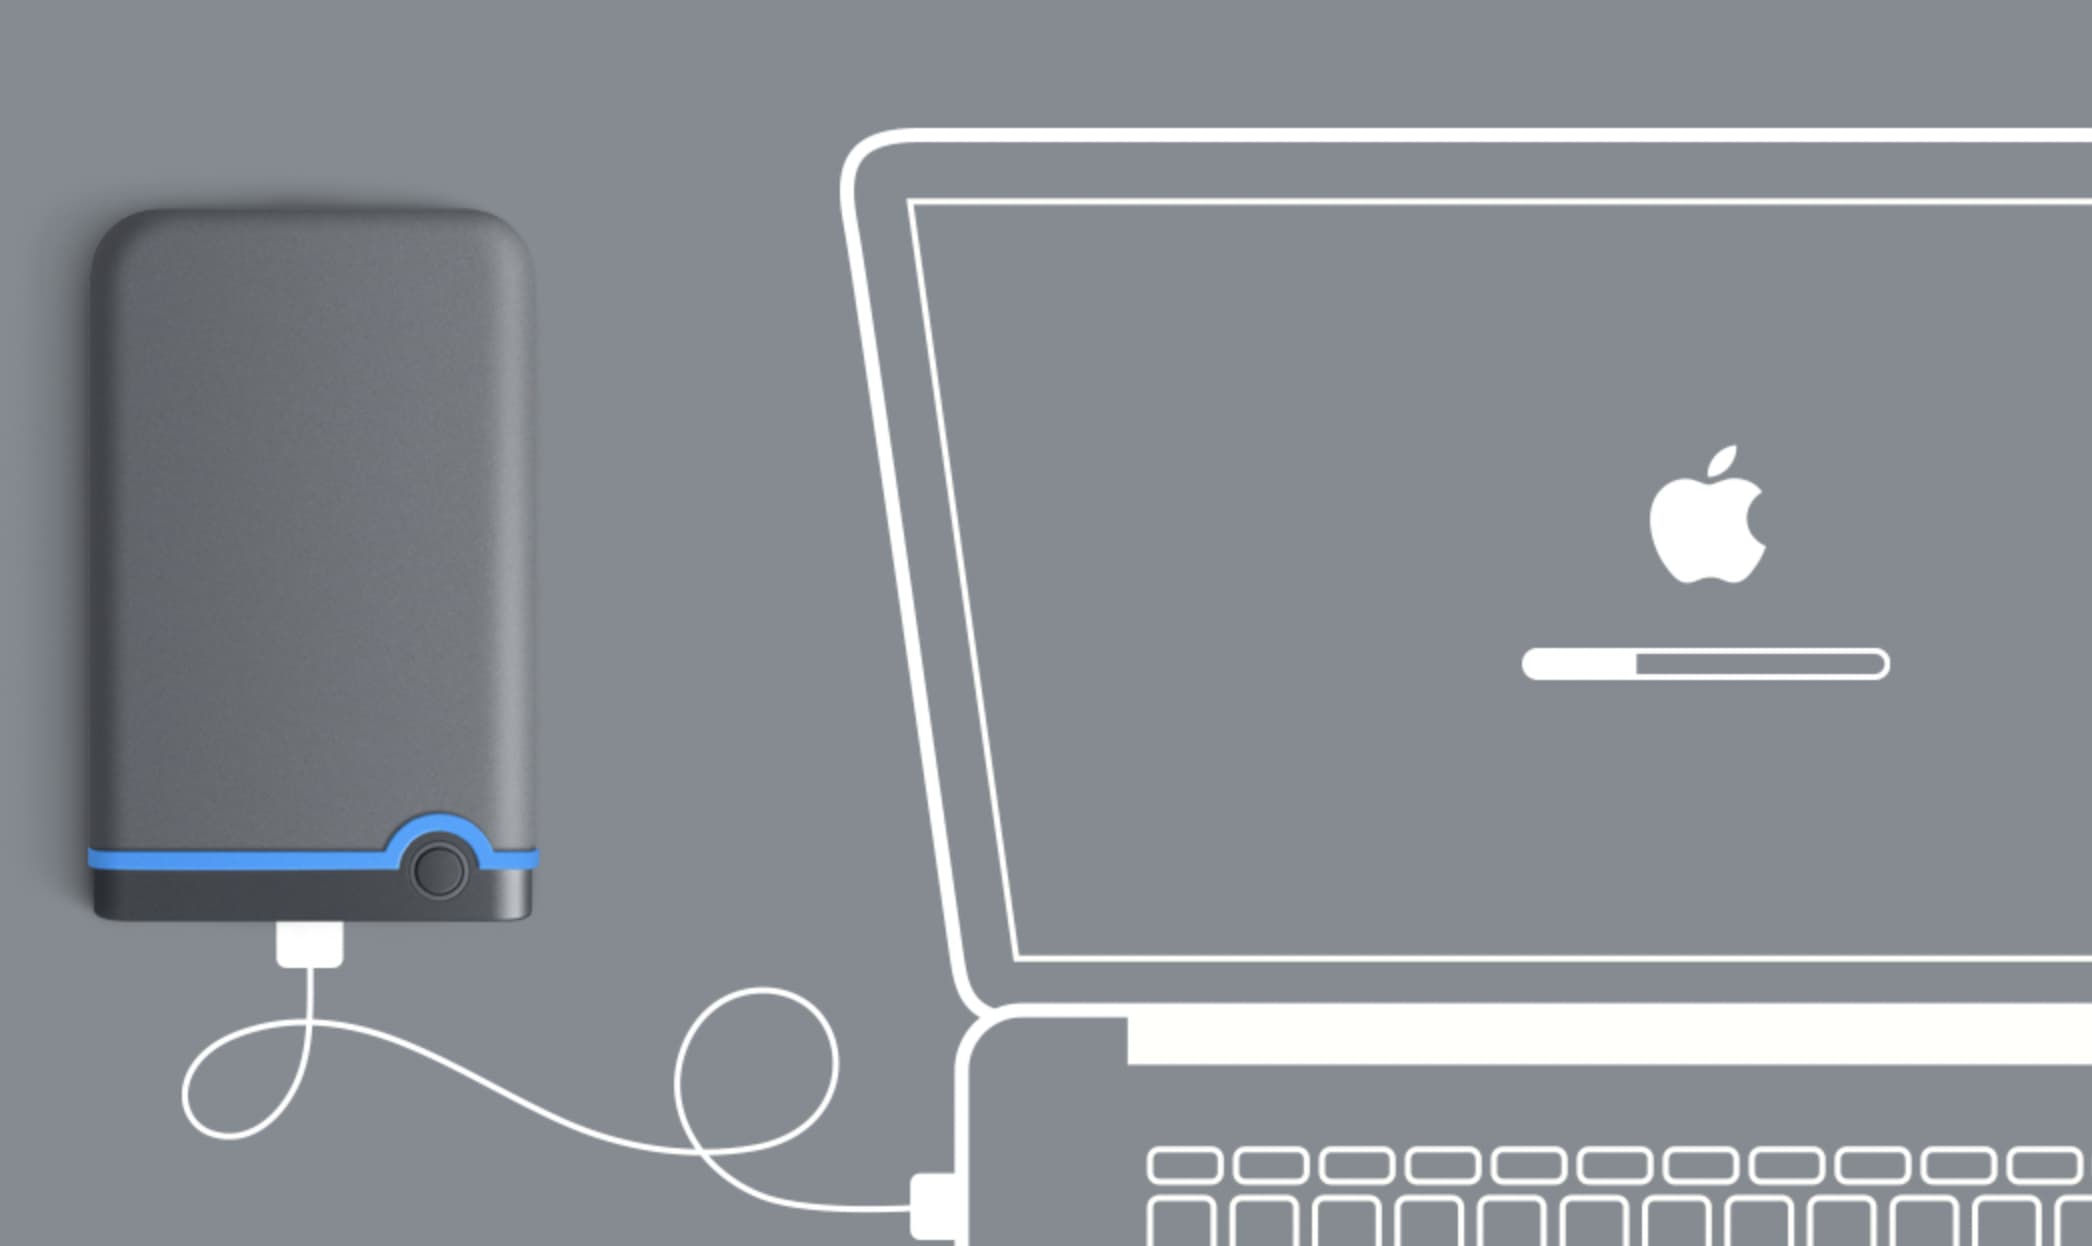 An illustration showing an external drive connected to MacBook